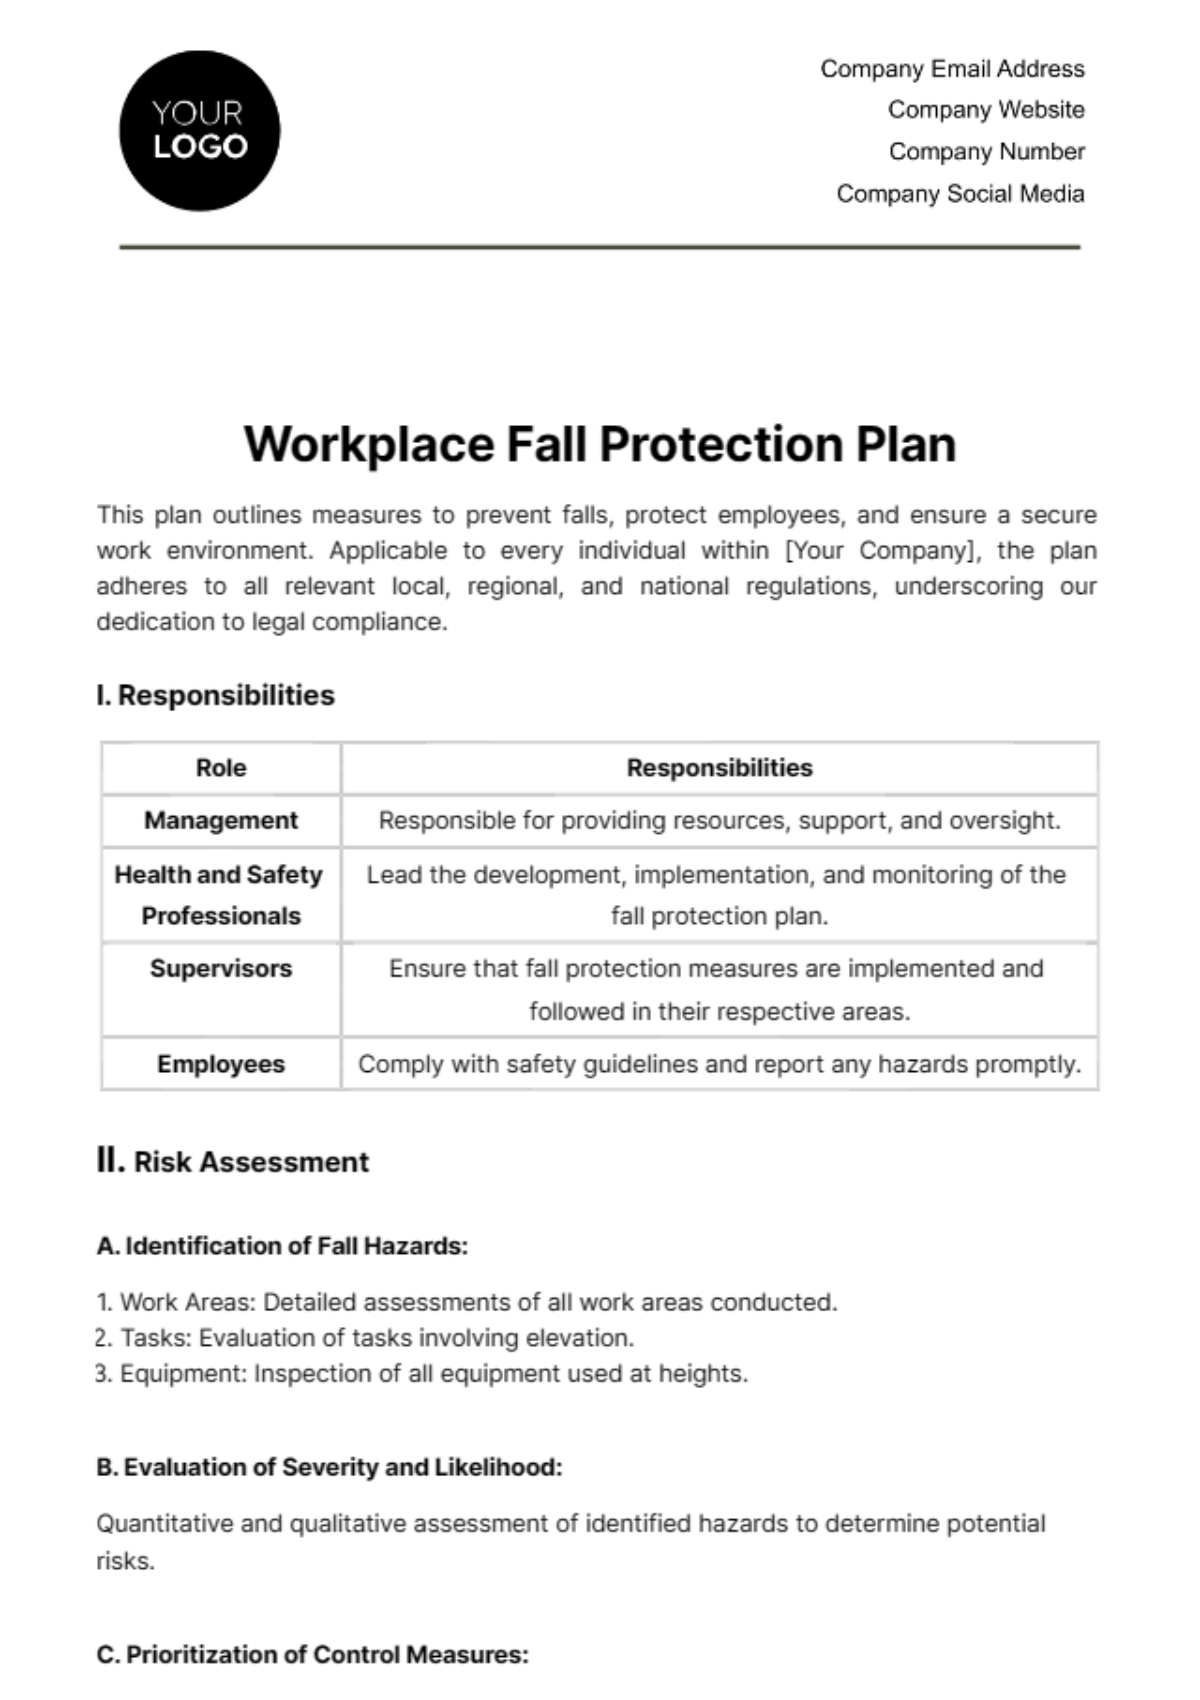 Workplace Fall Protection Plan Template